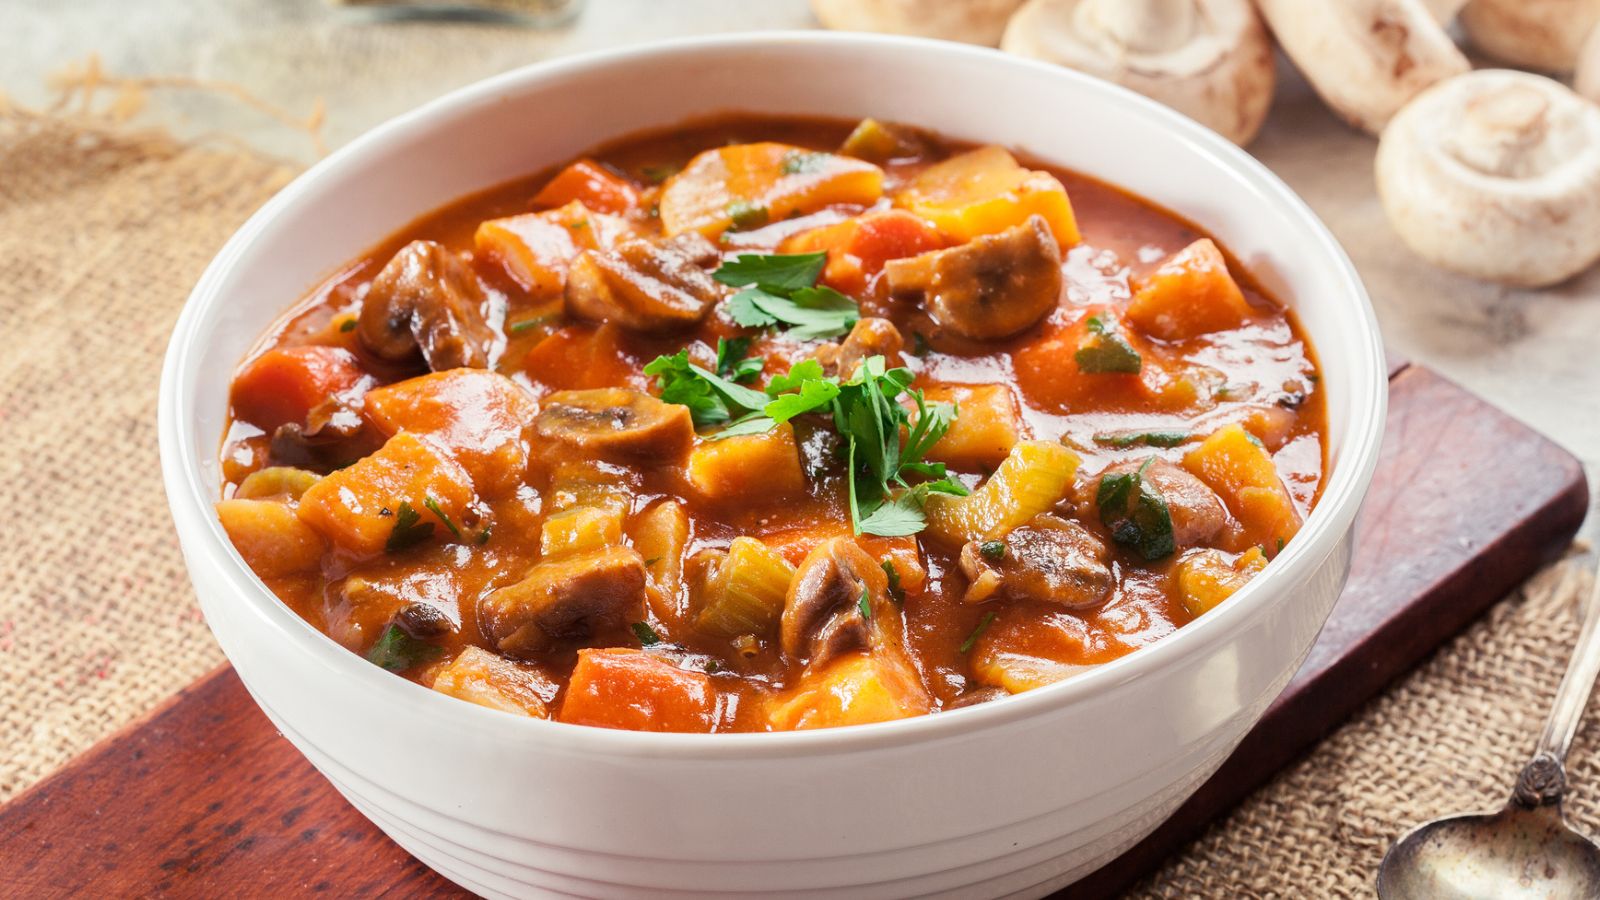 Savor Your Weekends: 20 Delicious Yet Budget-Friendly Stews for Lunch